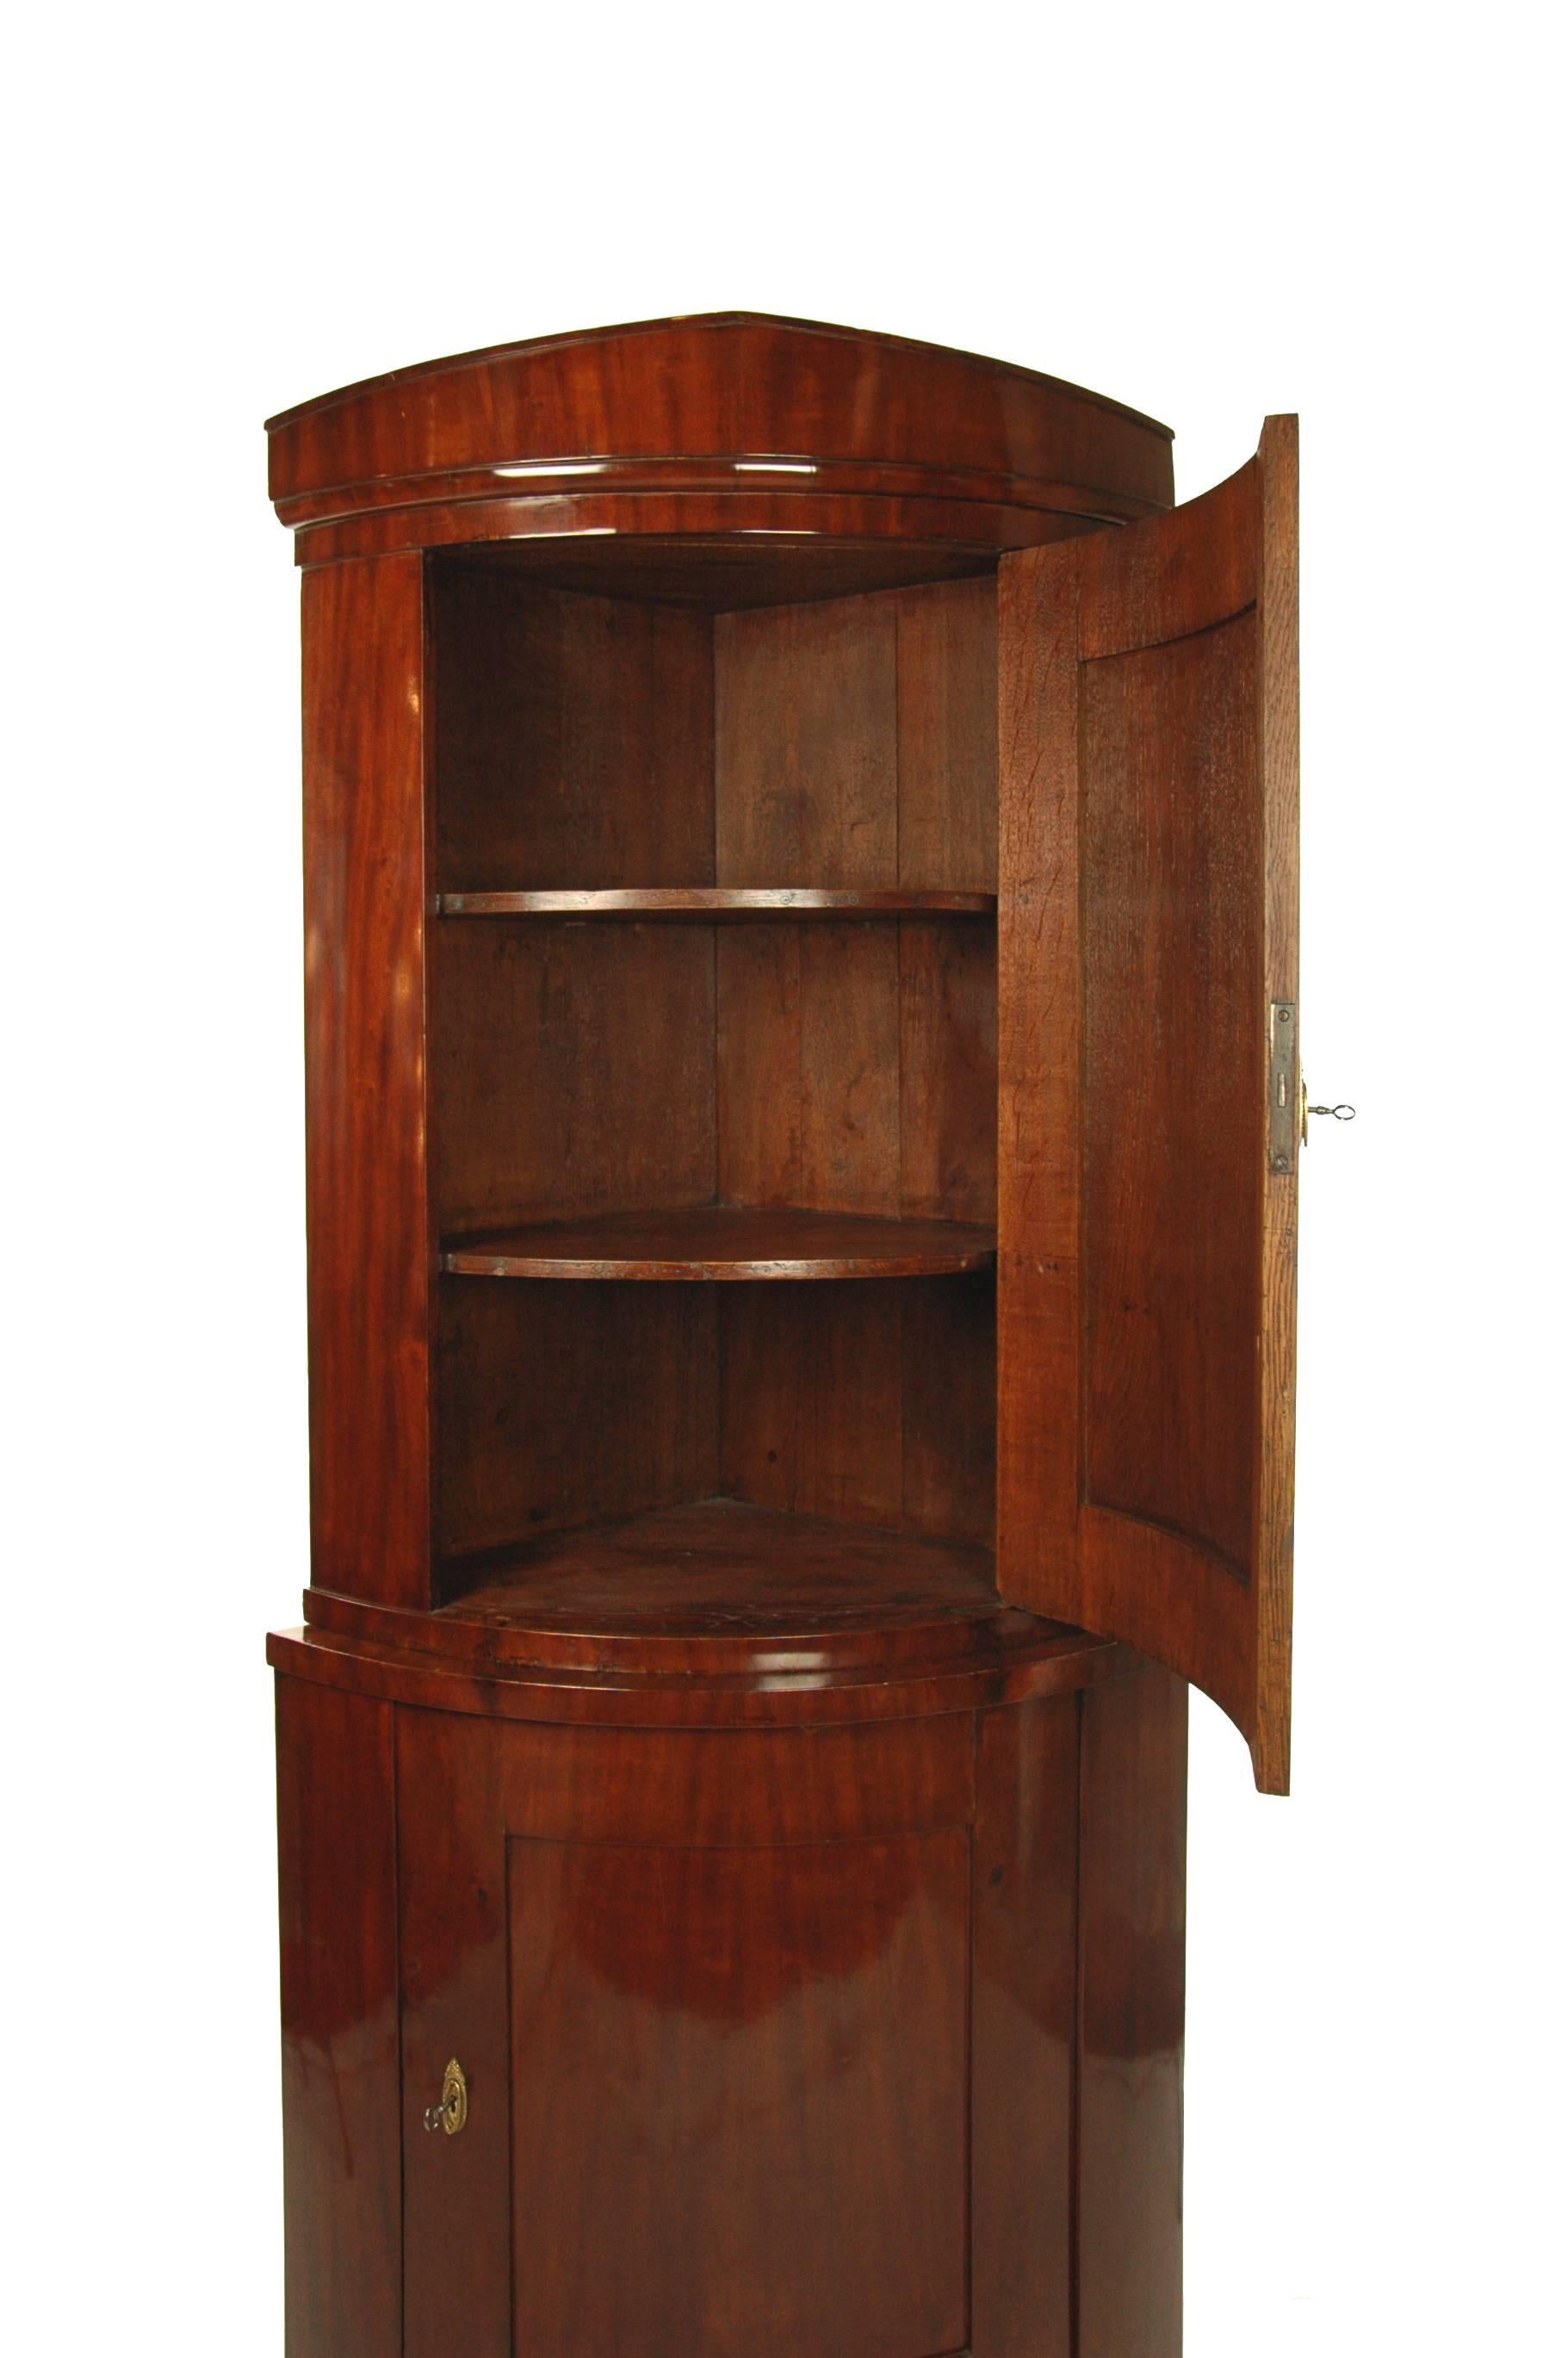 Mahogany veneered,
circa 1830-1840
 Two-part.
Closed form.
Curved body.
Triangular gable.
Restored state.
Shellac hand polish.
Measures: Height 220 cm, depth 68 cm, width 68 cm.

I dispatch by air in safe wood boxes only. So no need to